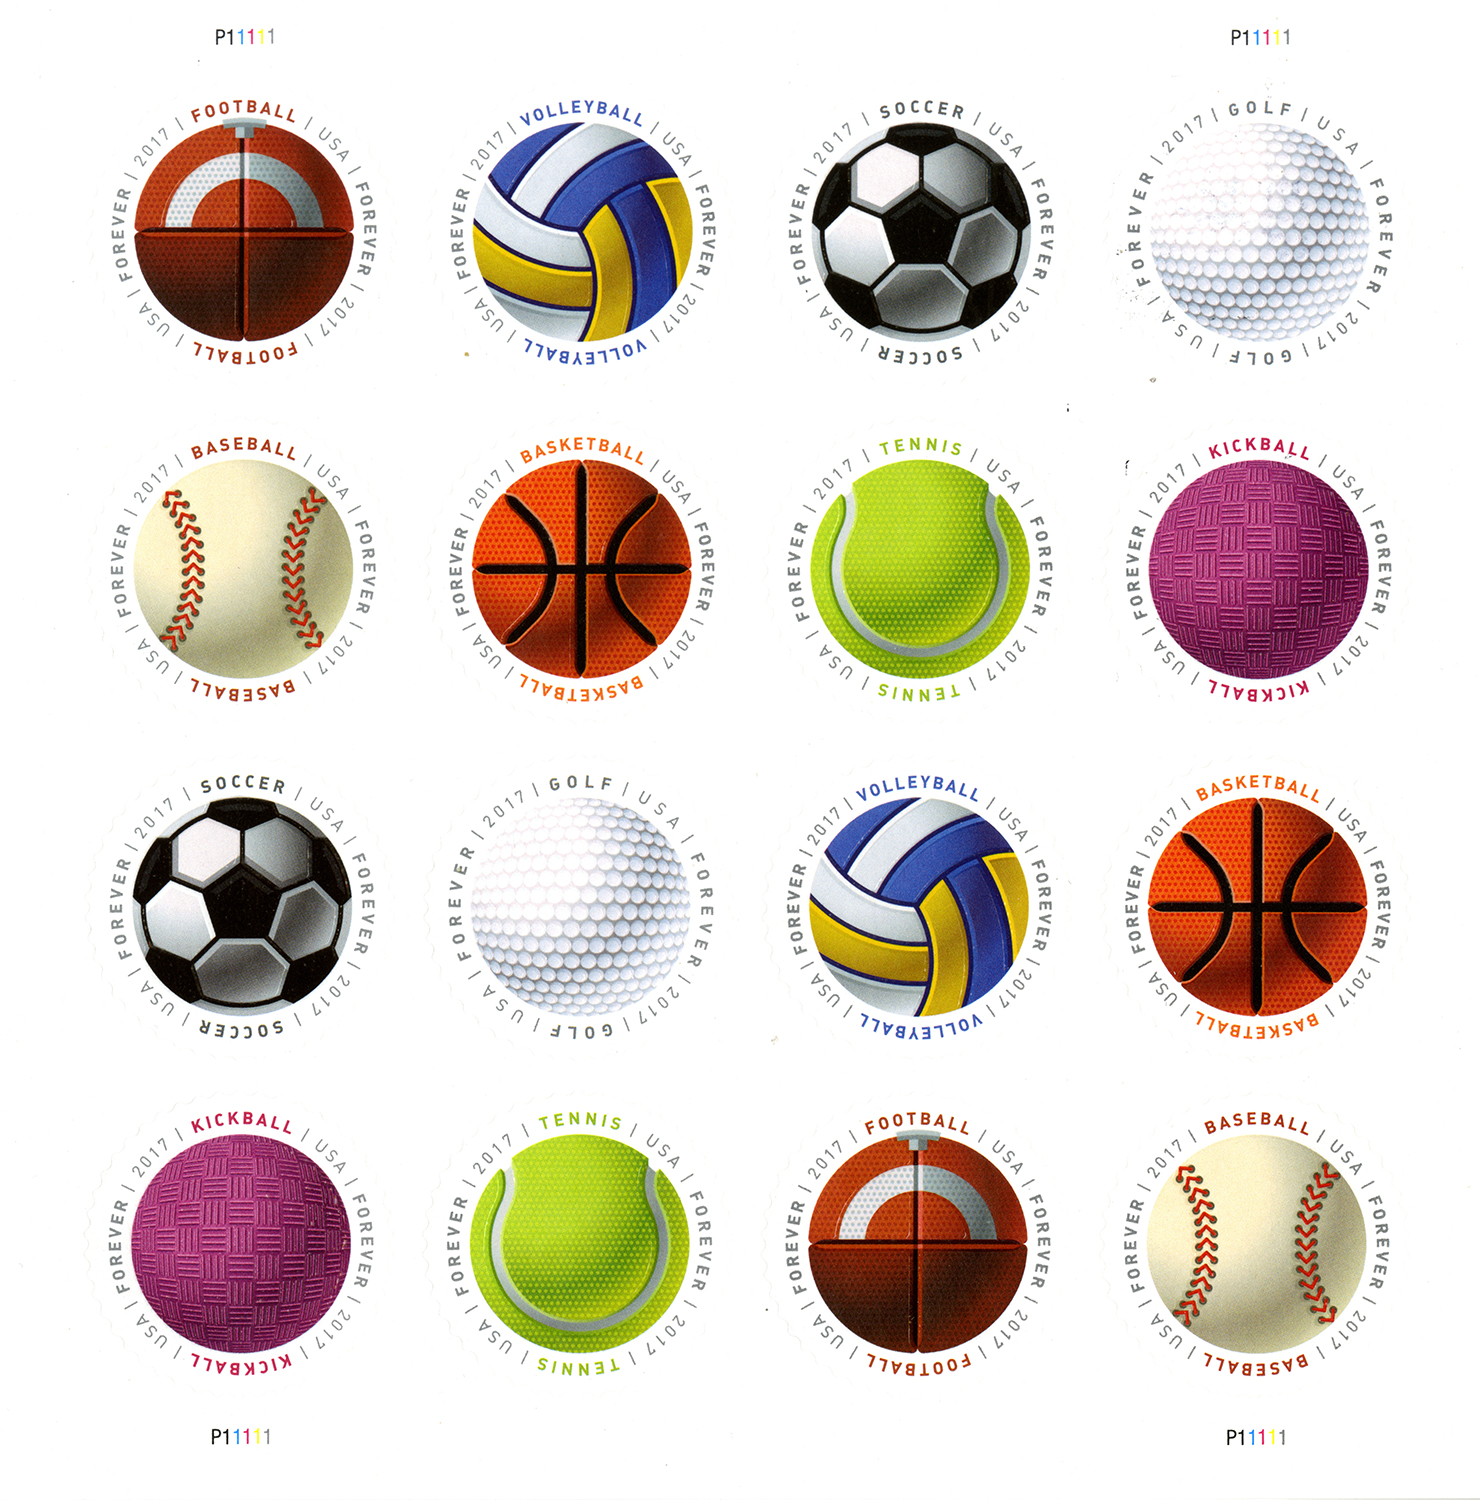 Sheet of 16 round stamps, featuring different types of ball that are used for ballgames.